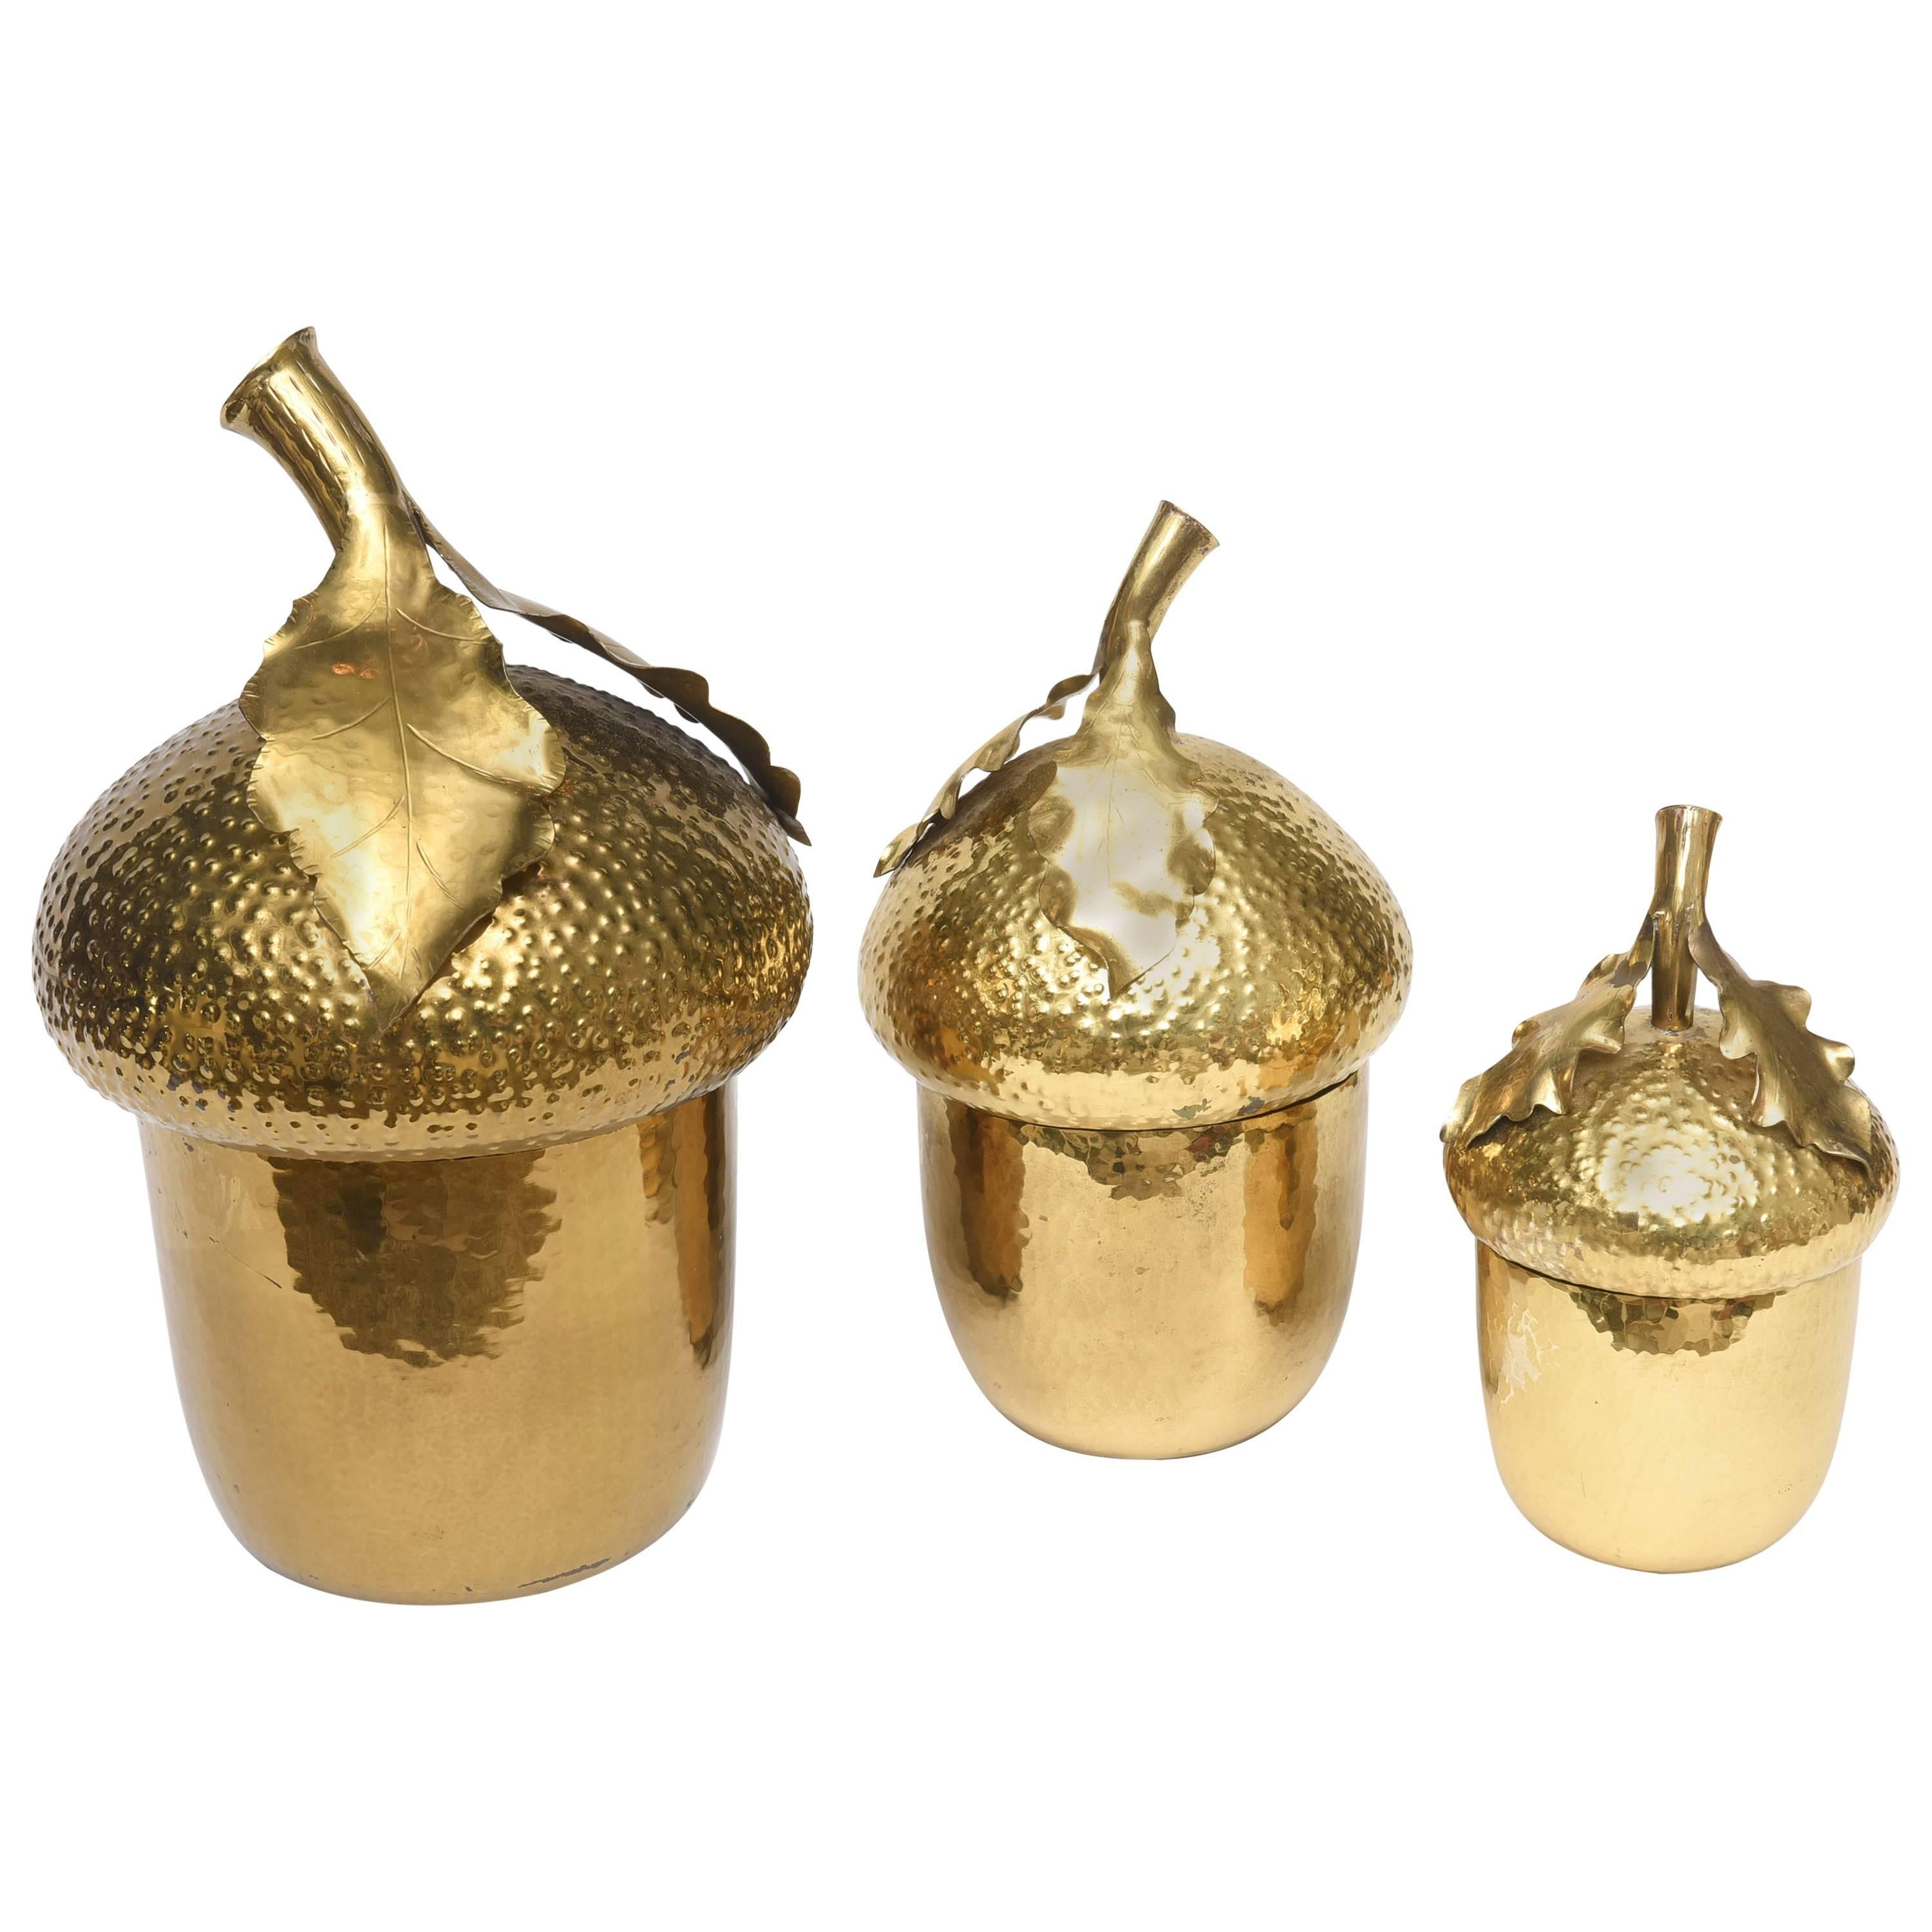 Hand-Wrought Italian Brass Canister Serving Set